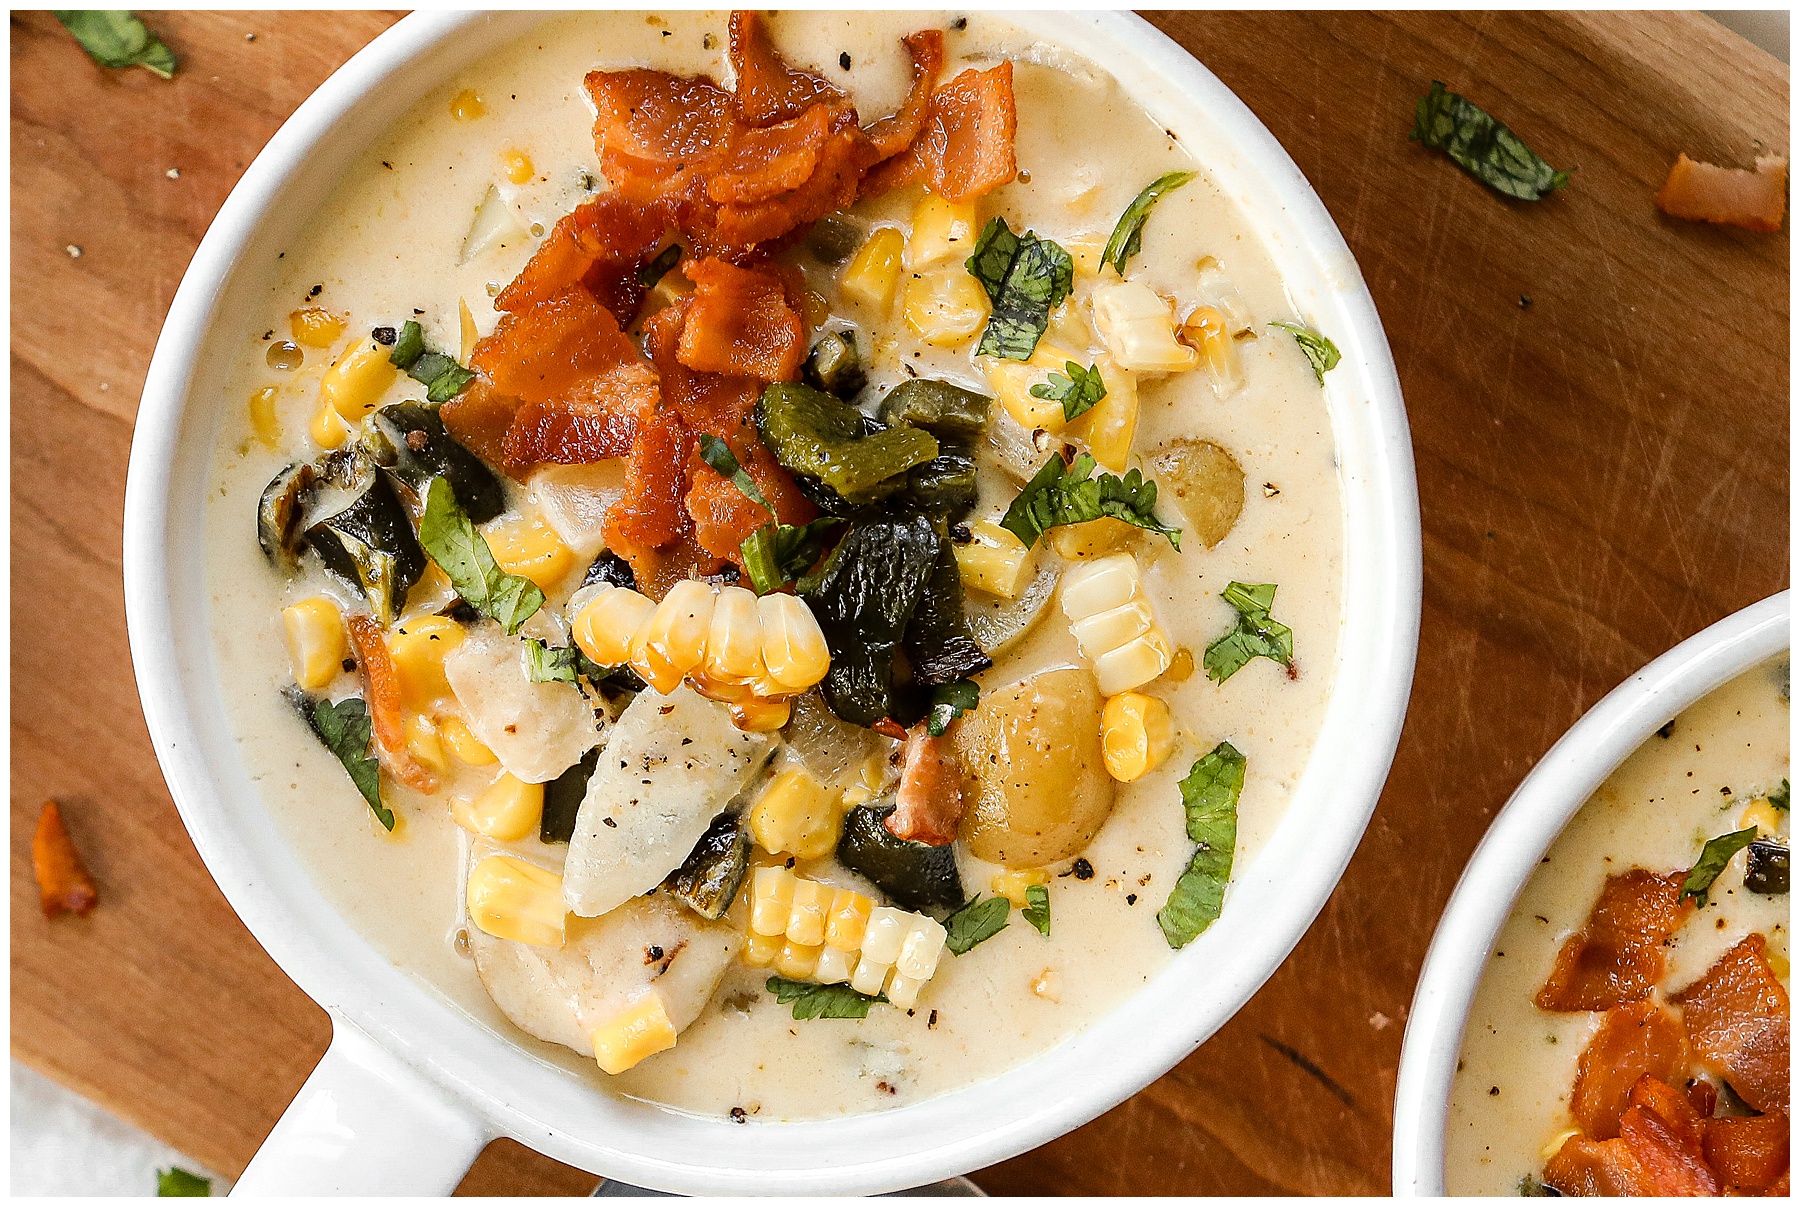 Roasted Poblano and Corn Chowder with goat cheese